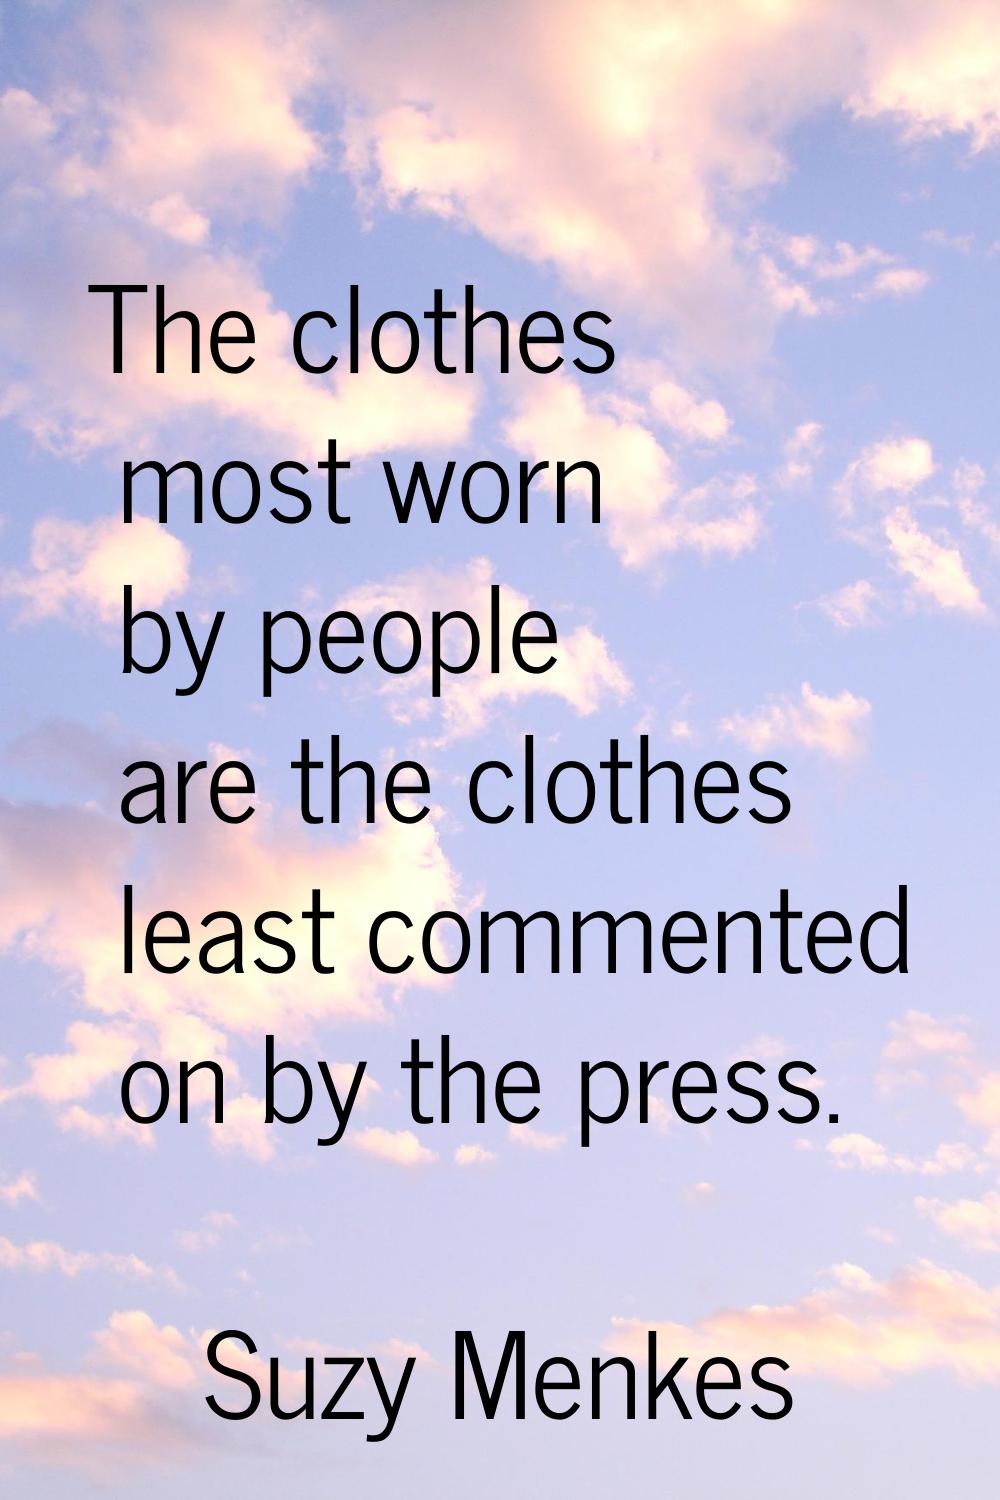 The clothes most worn by people are the clothes least commented on by the press.